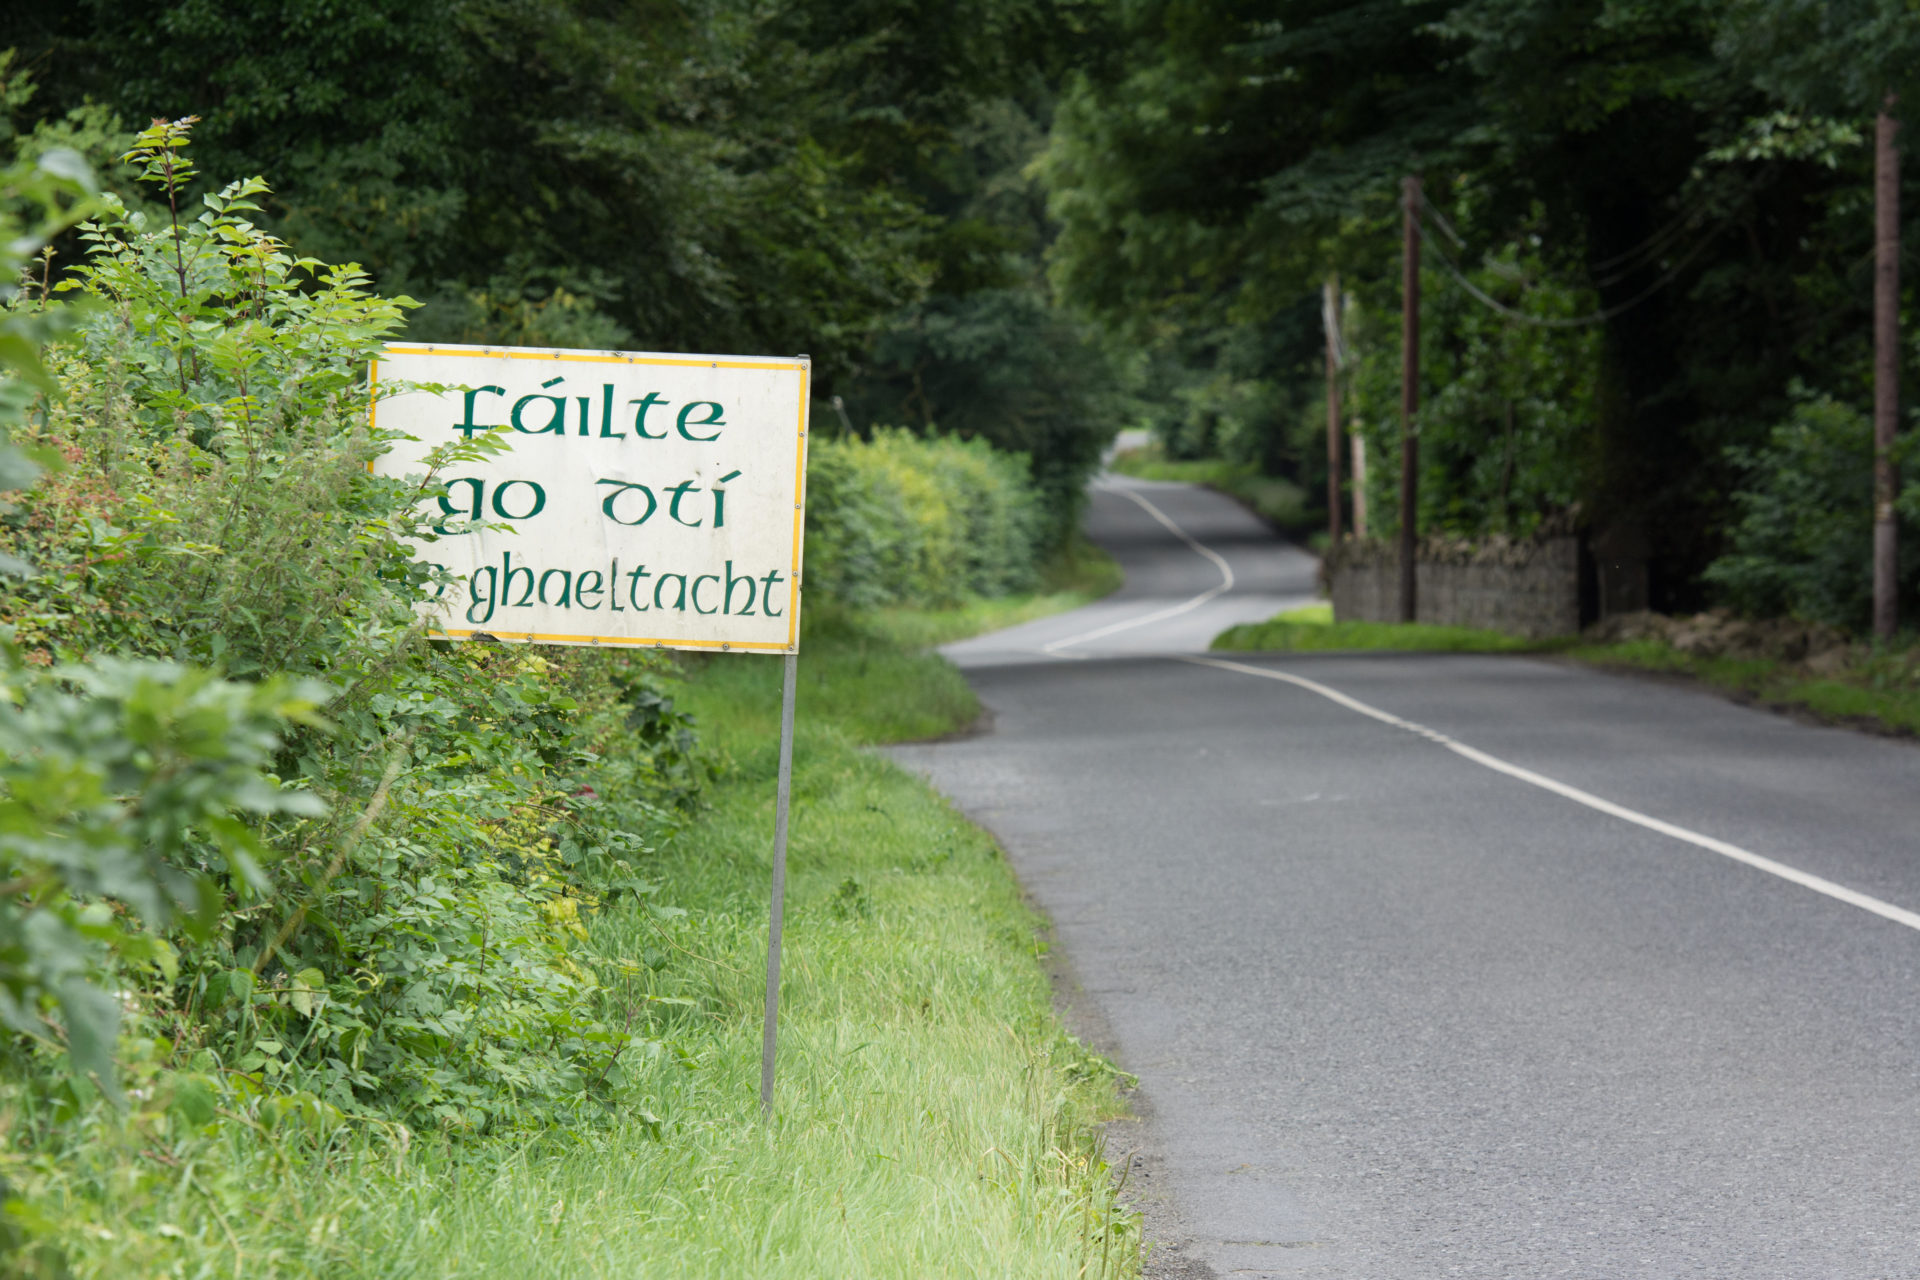 HDPJB9 Sign in Irish language welcoming visitors to the gaeltacht (Irish-speaking) part of county Meath in Ireland.